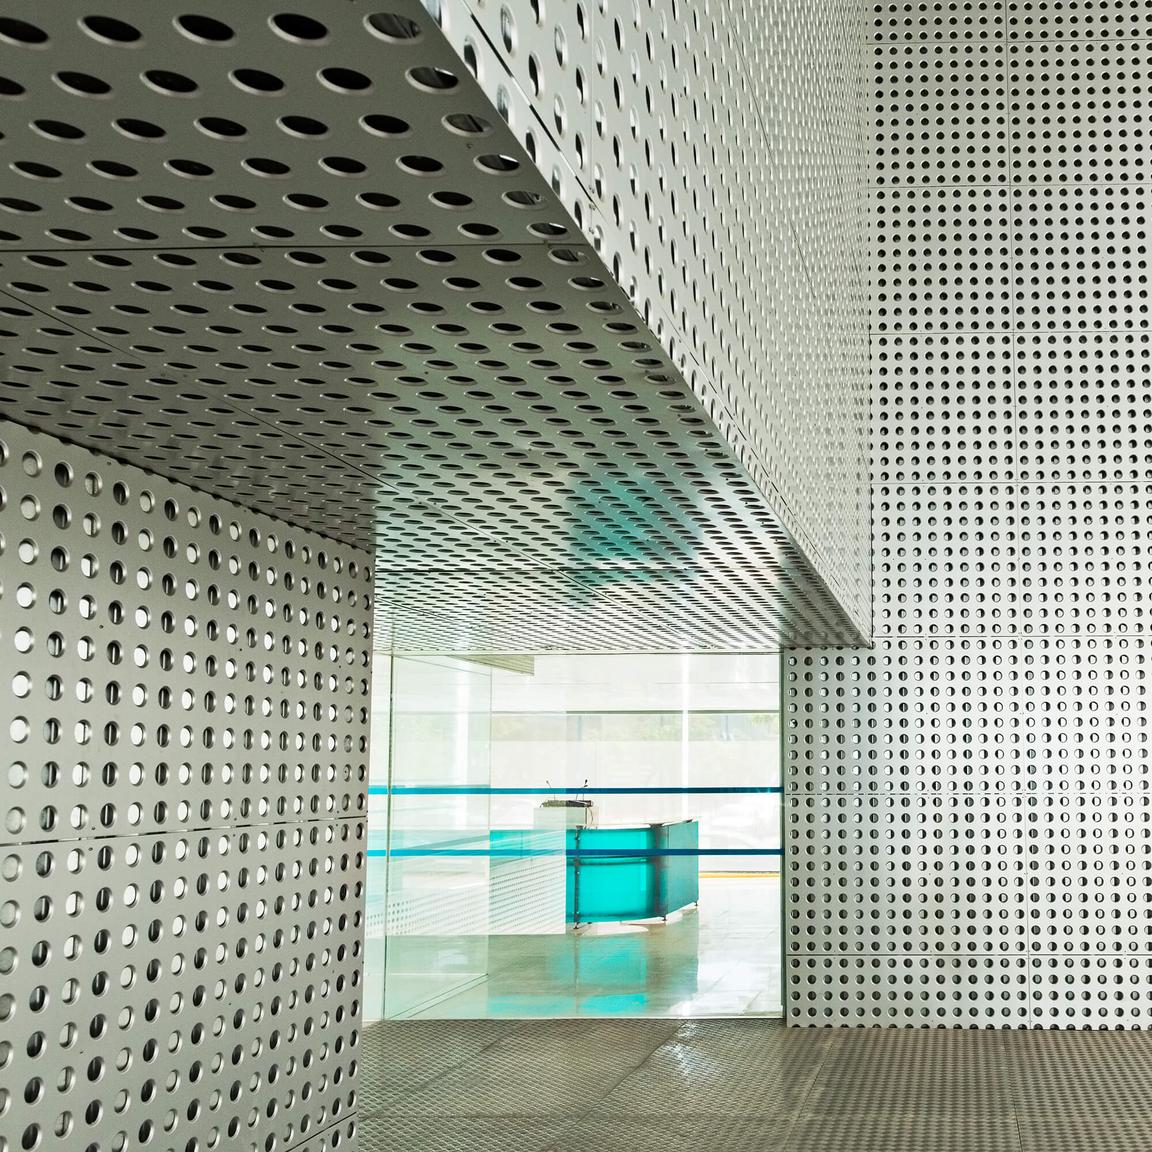 Interior architecture with perforated material